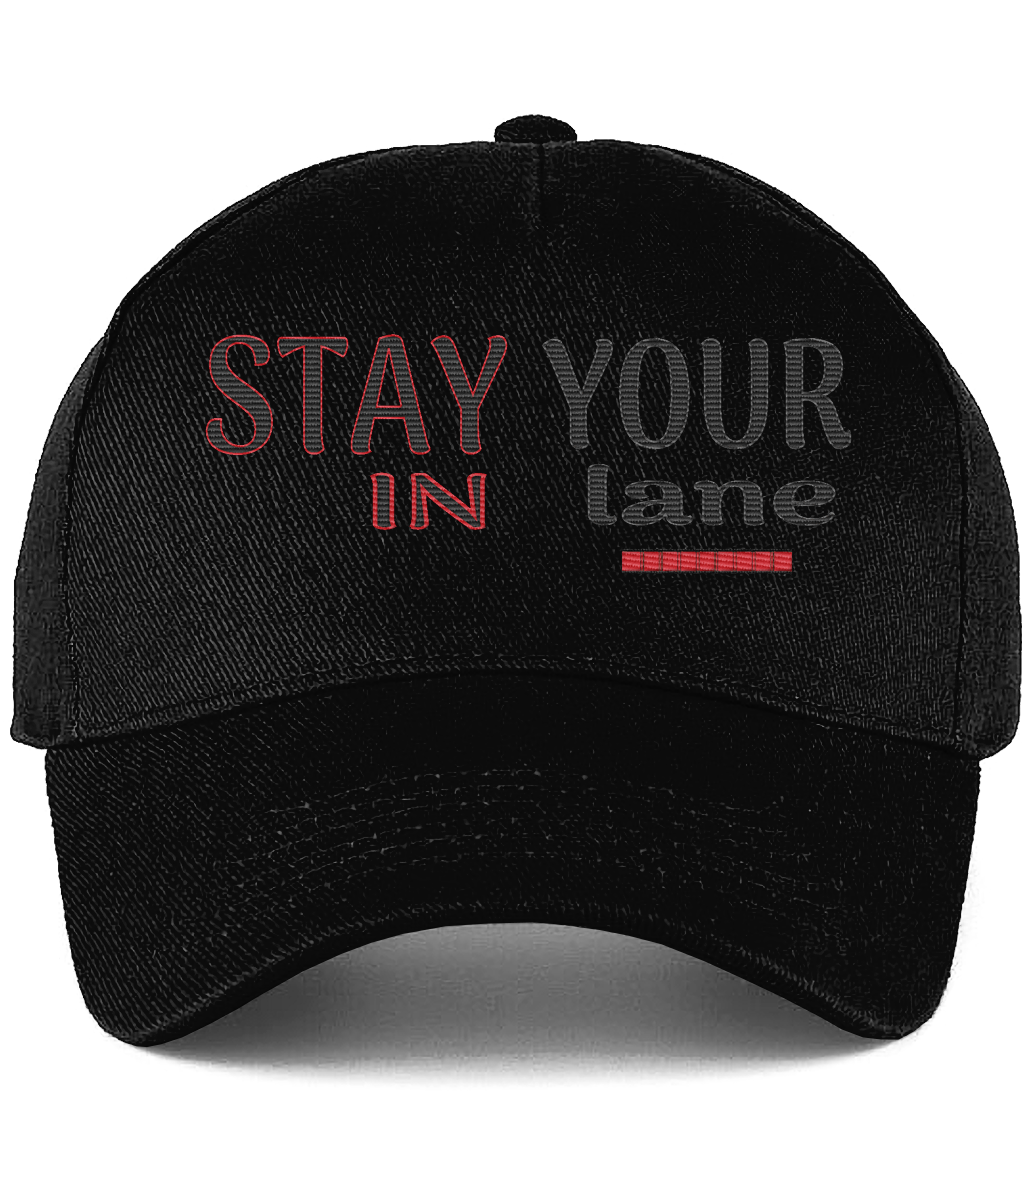 STAY IN YOUR lane 01-02 Designer Embroidered Ultimate Cotton Drill Baseball Cap (4 colors)